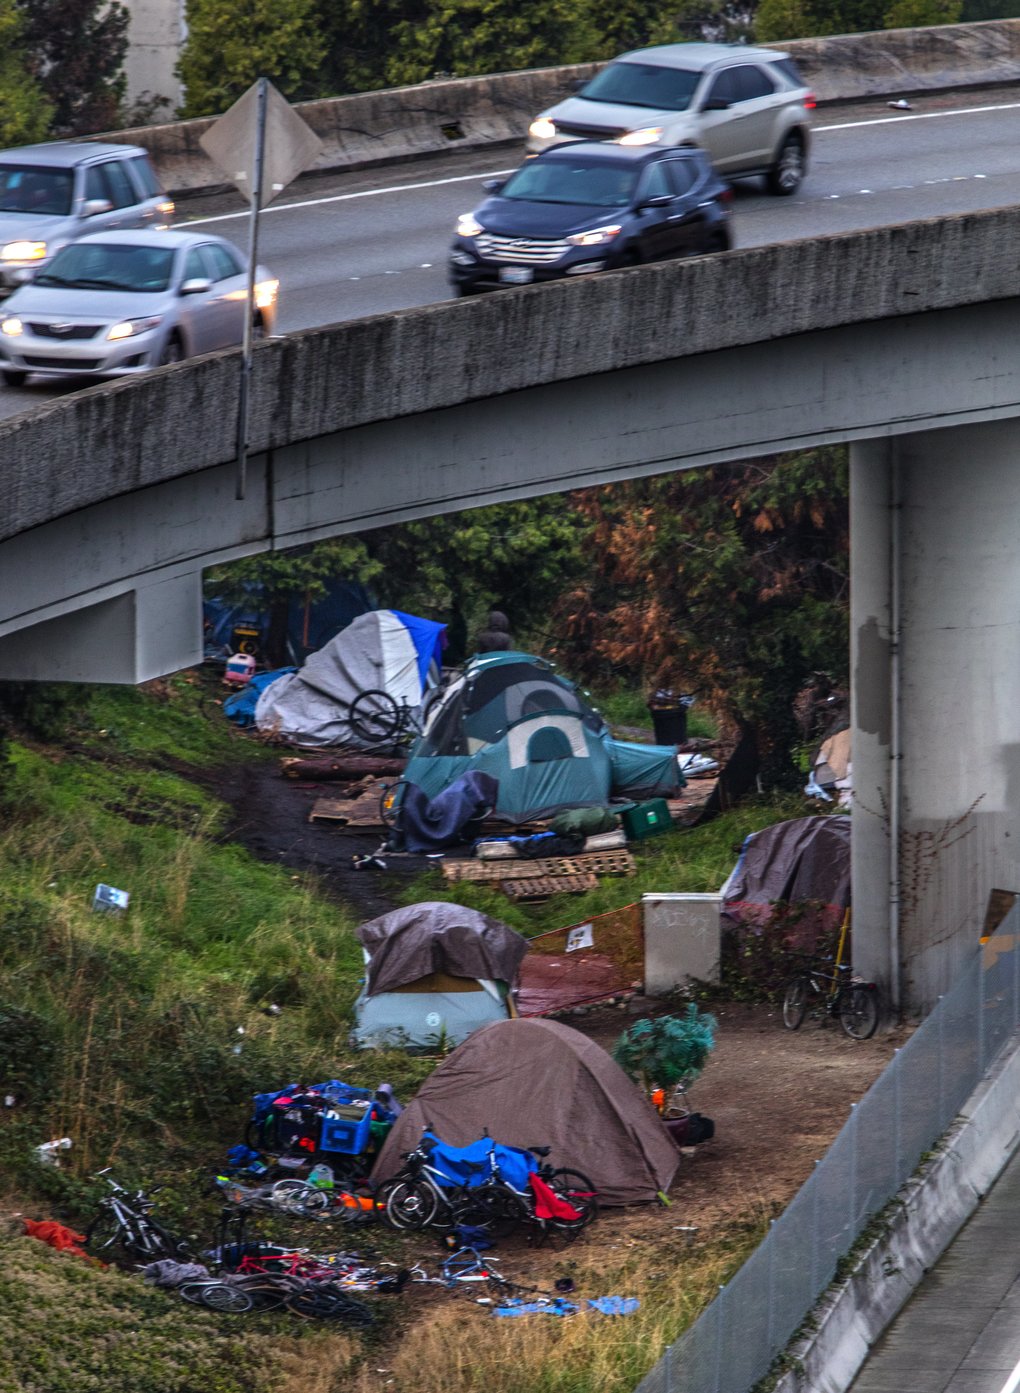 Friday October 23, 2015. Squaters camping out under the Highway 5 overpass to Highway 90 in Seattle.